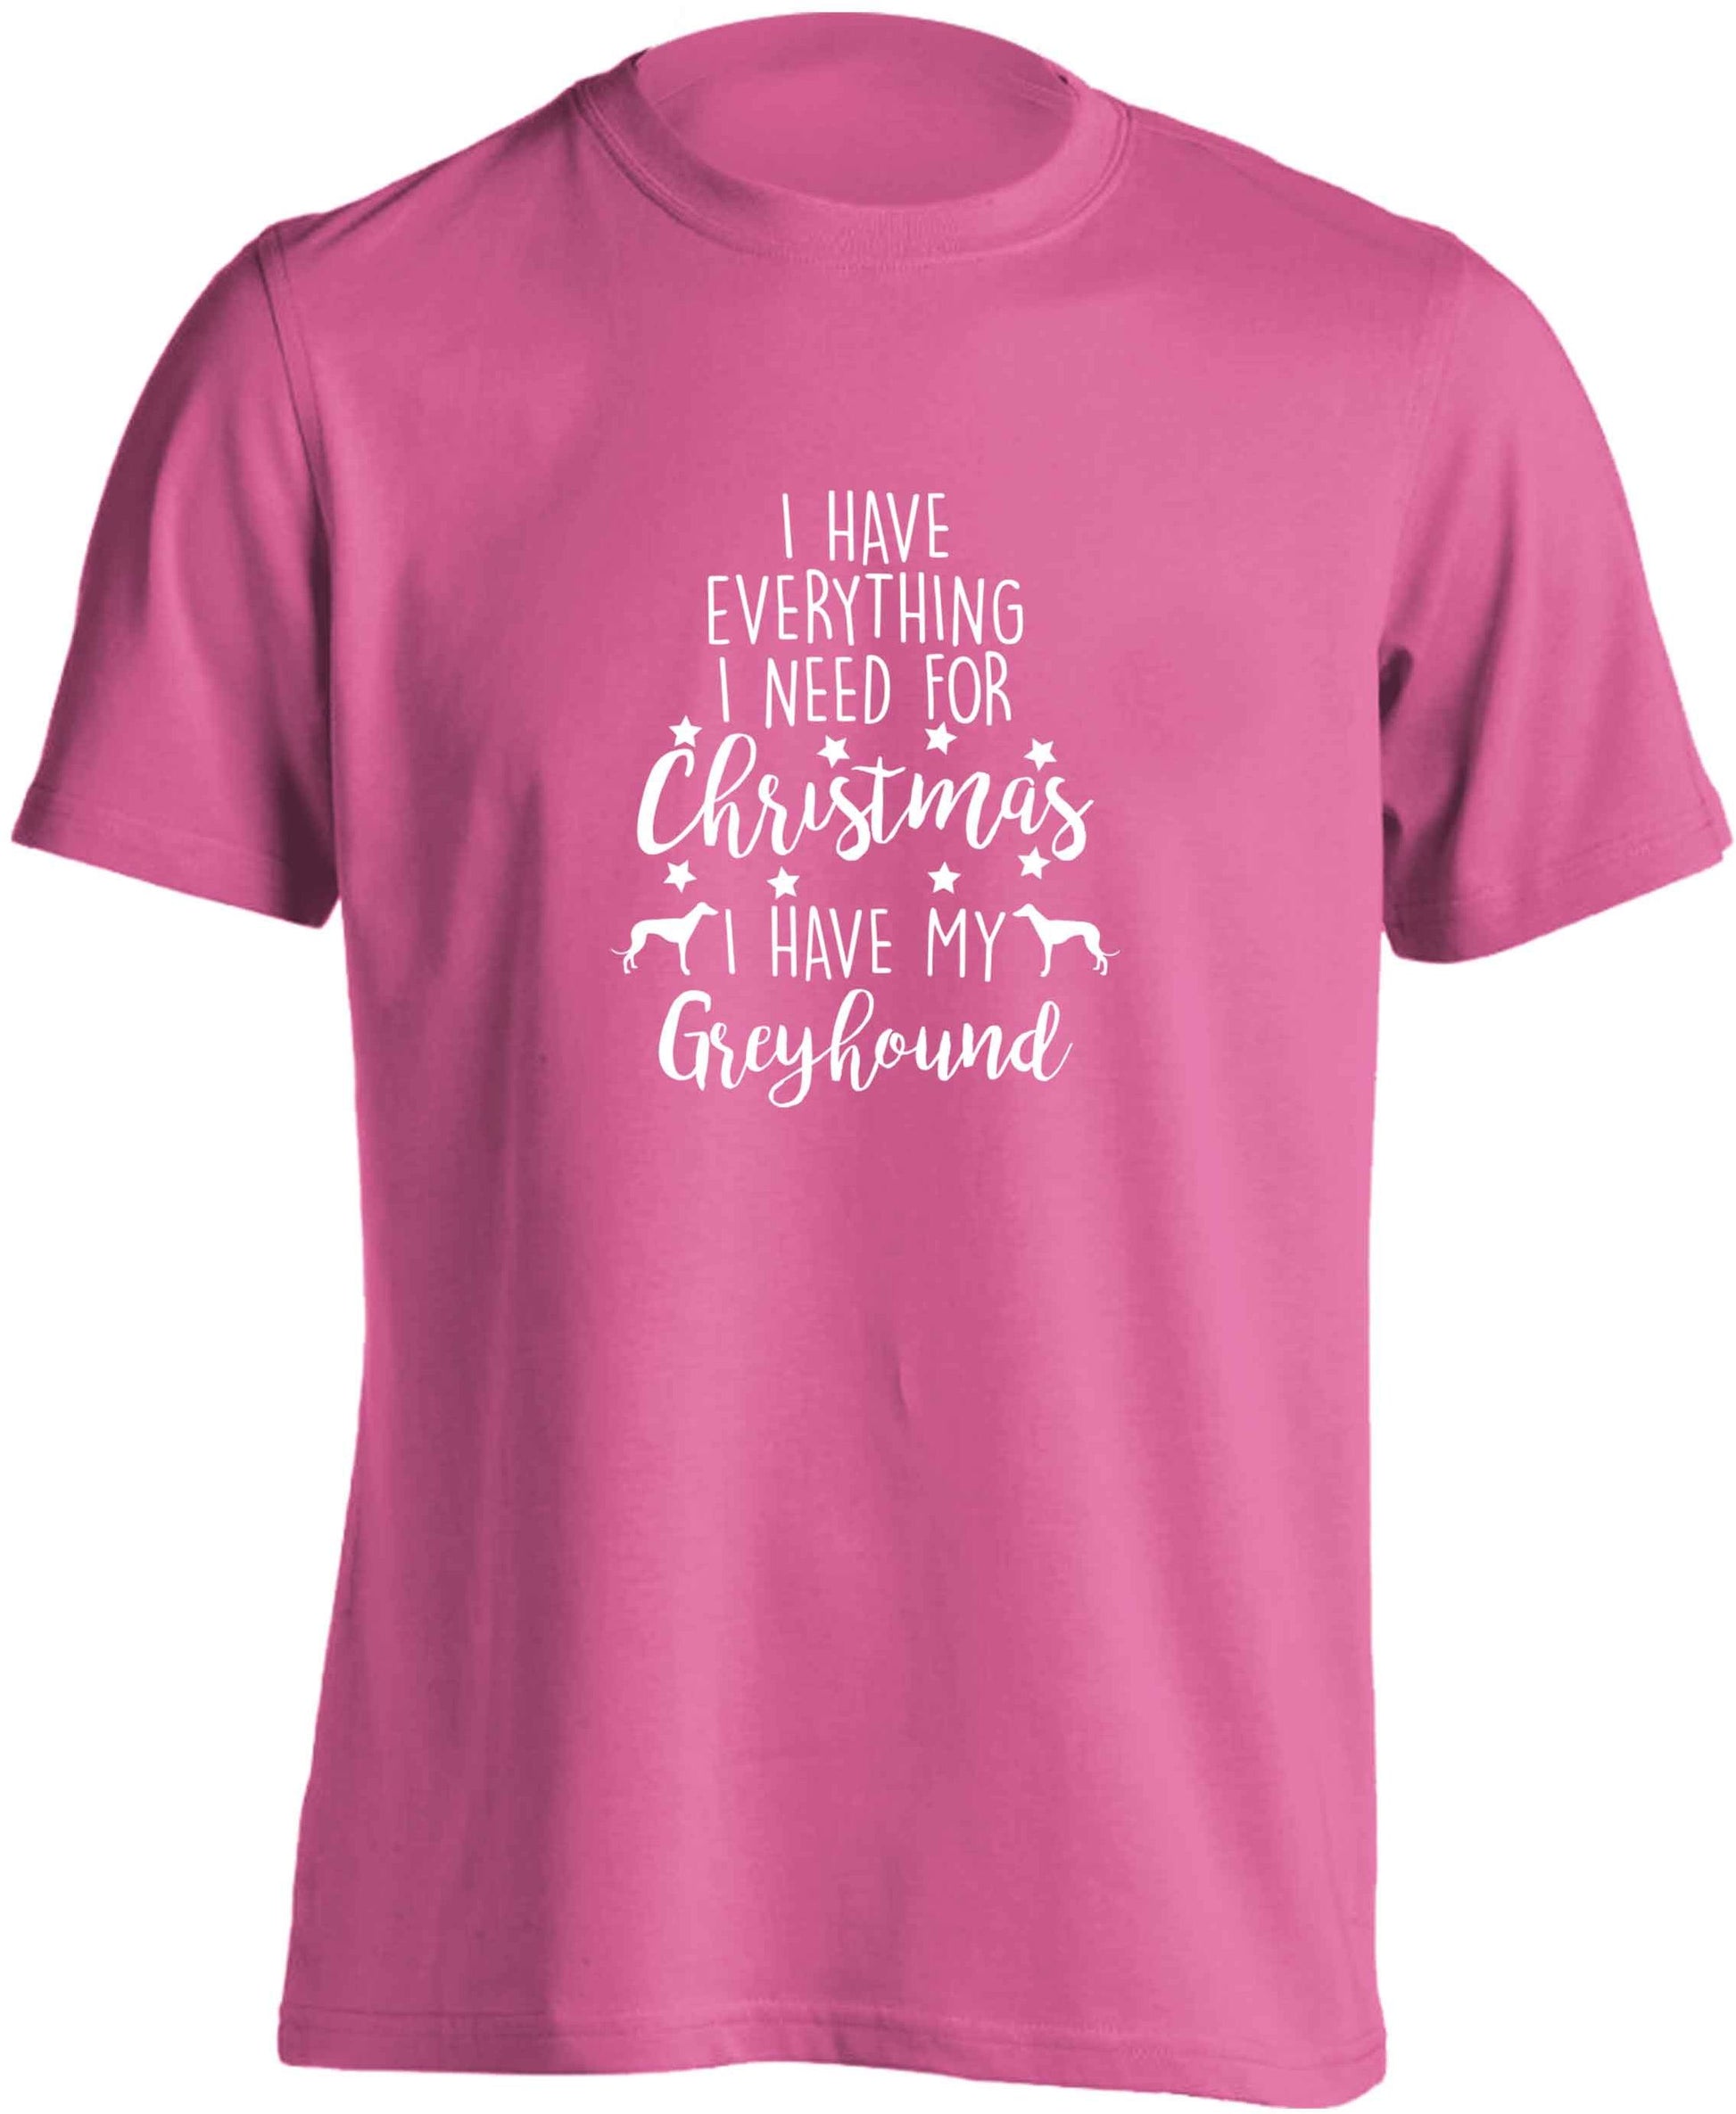 I have everything I need for Christmas I have my greyhound adults unisex pink Tshirt 2XL